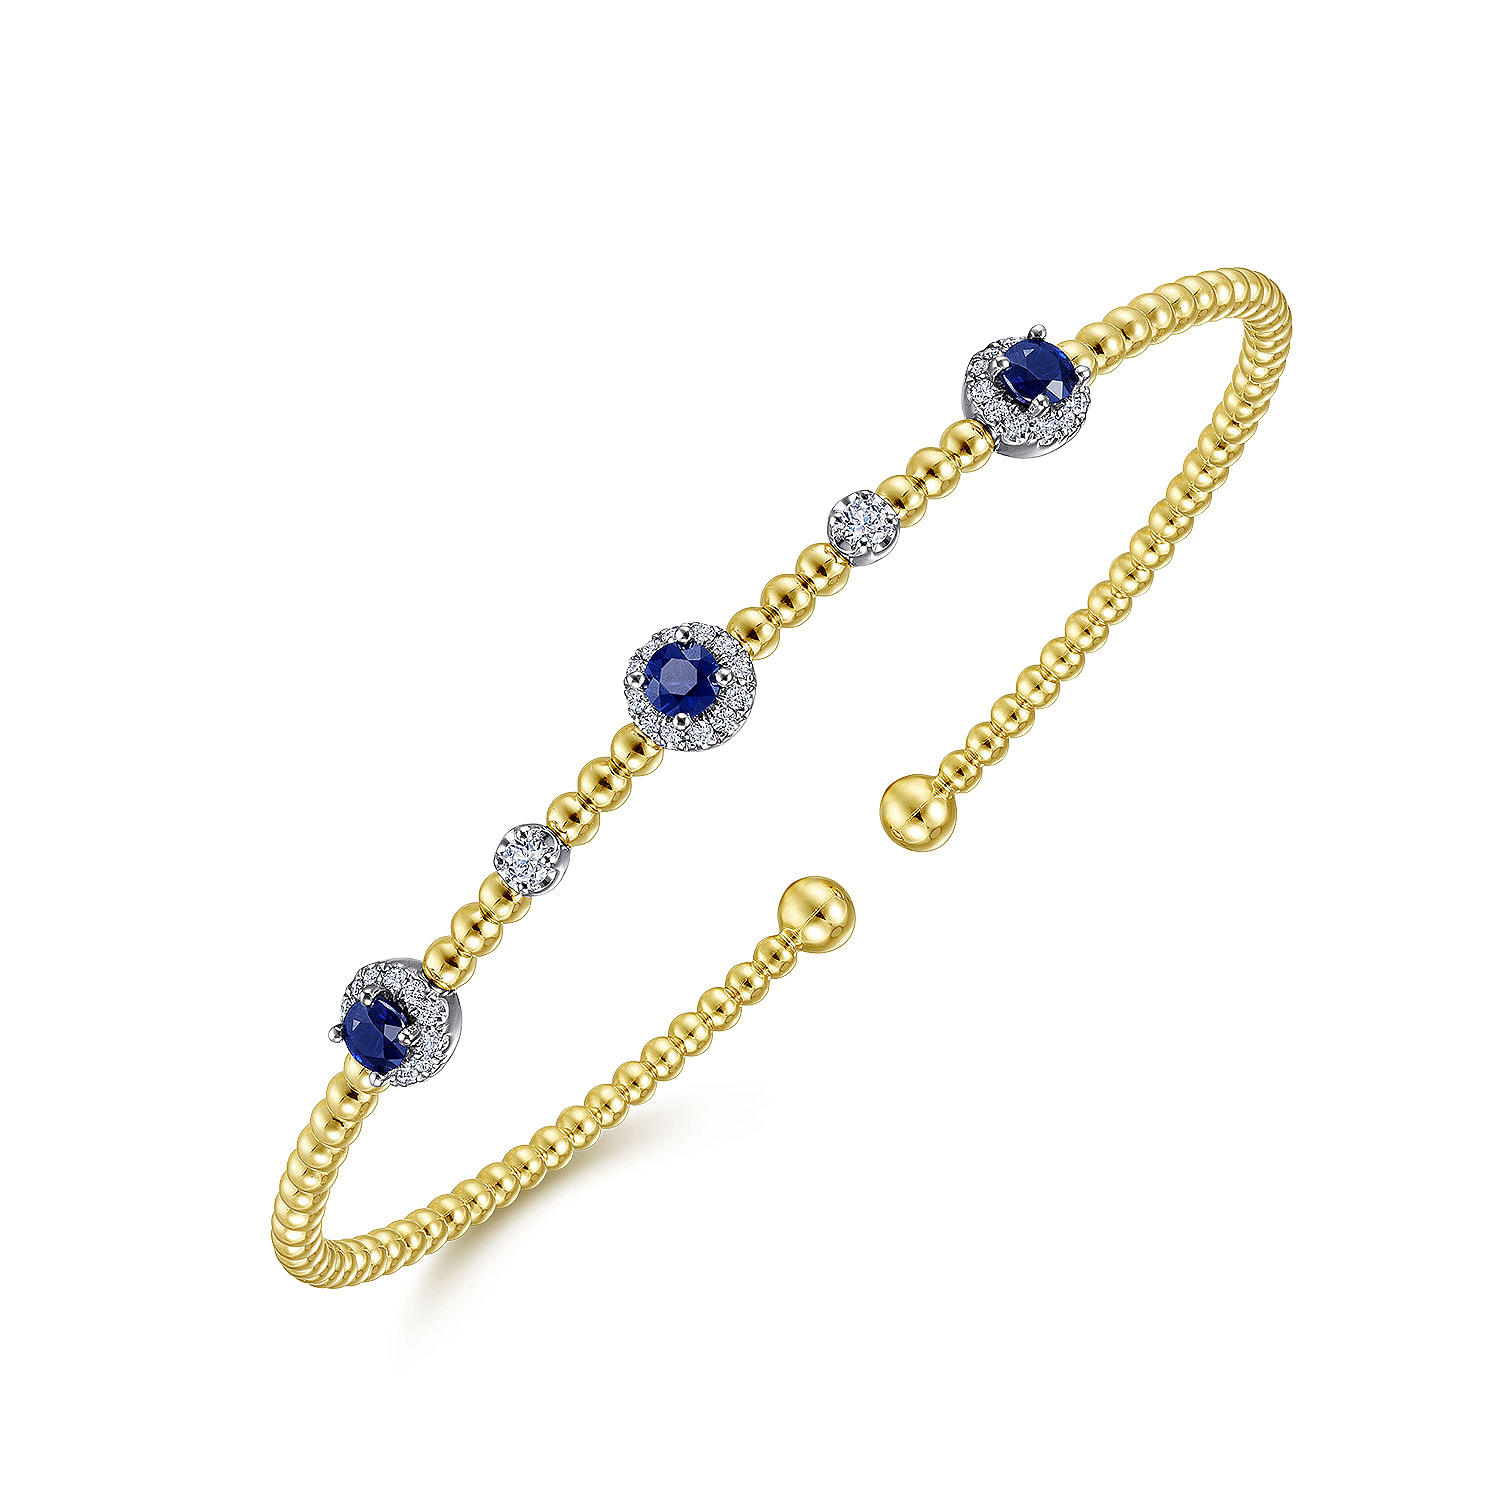 14K White-Yellow Gold Bujukan Bead Cuff Bracelet with Sapphire and Diamond Halo Stations